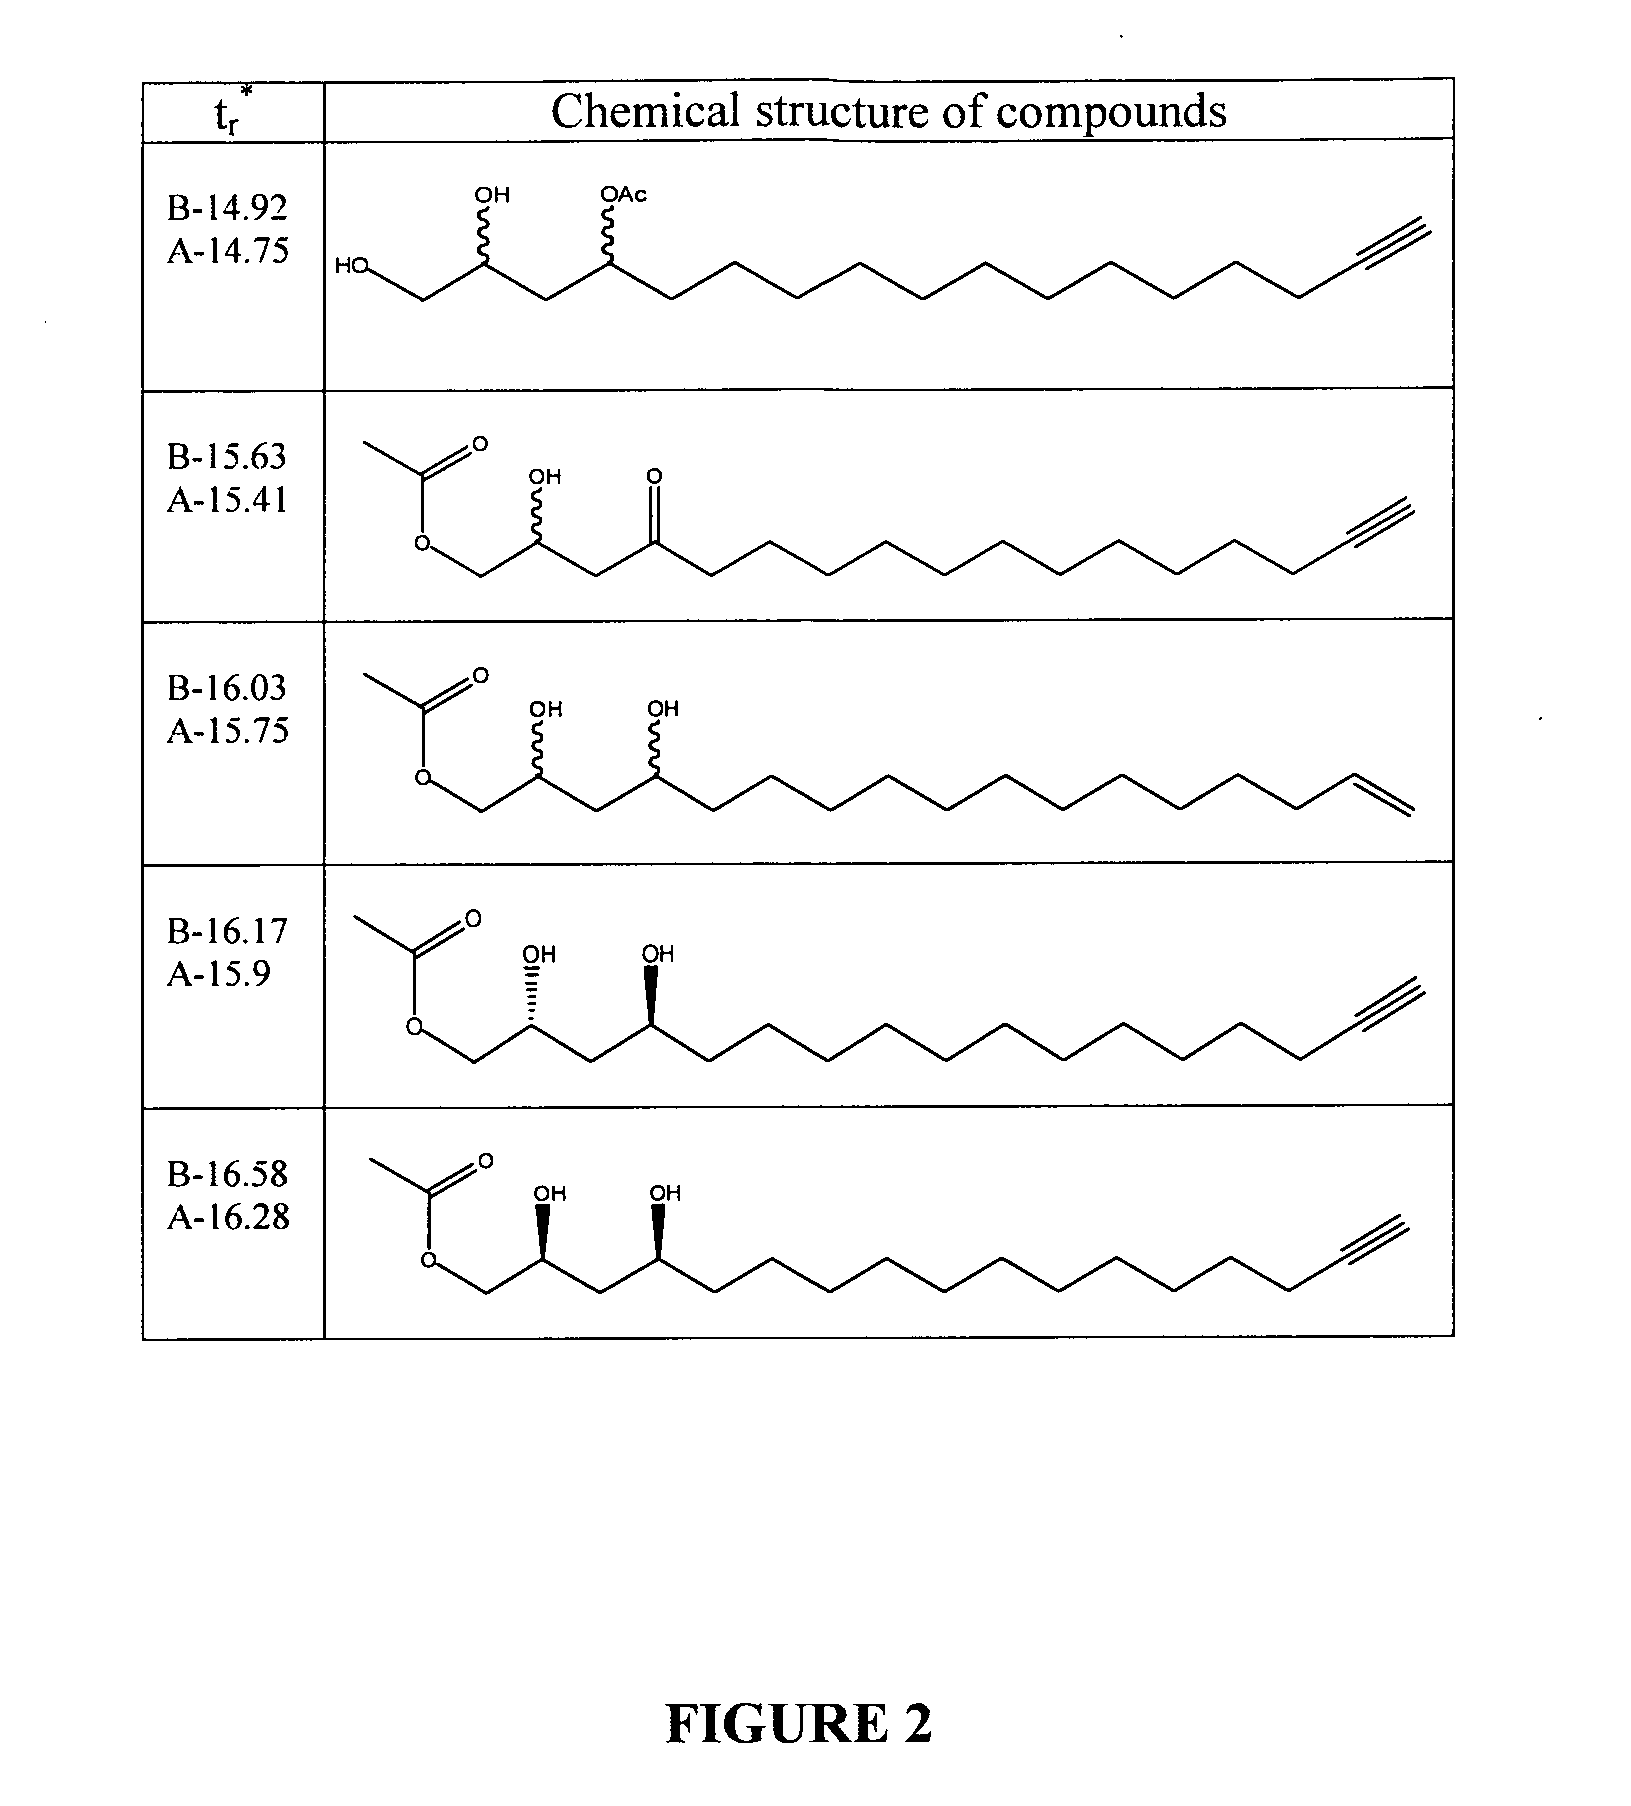 Therapeutic compositions comprising polyhydroxyltate fatty alcohol derivatives and uses thereof